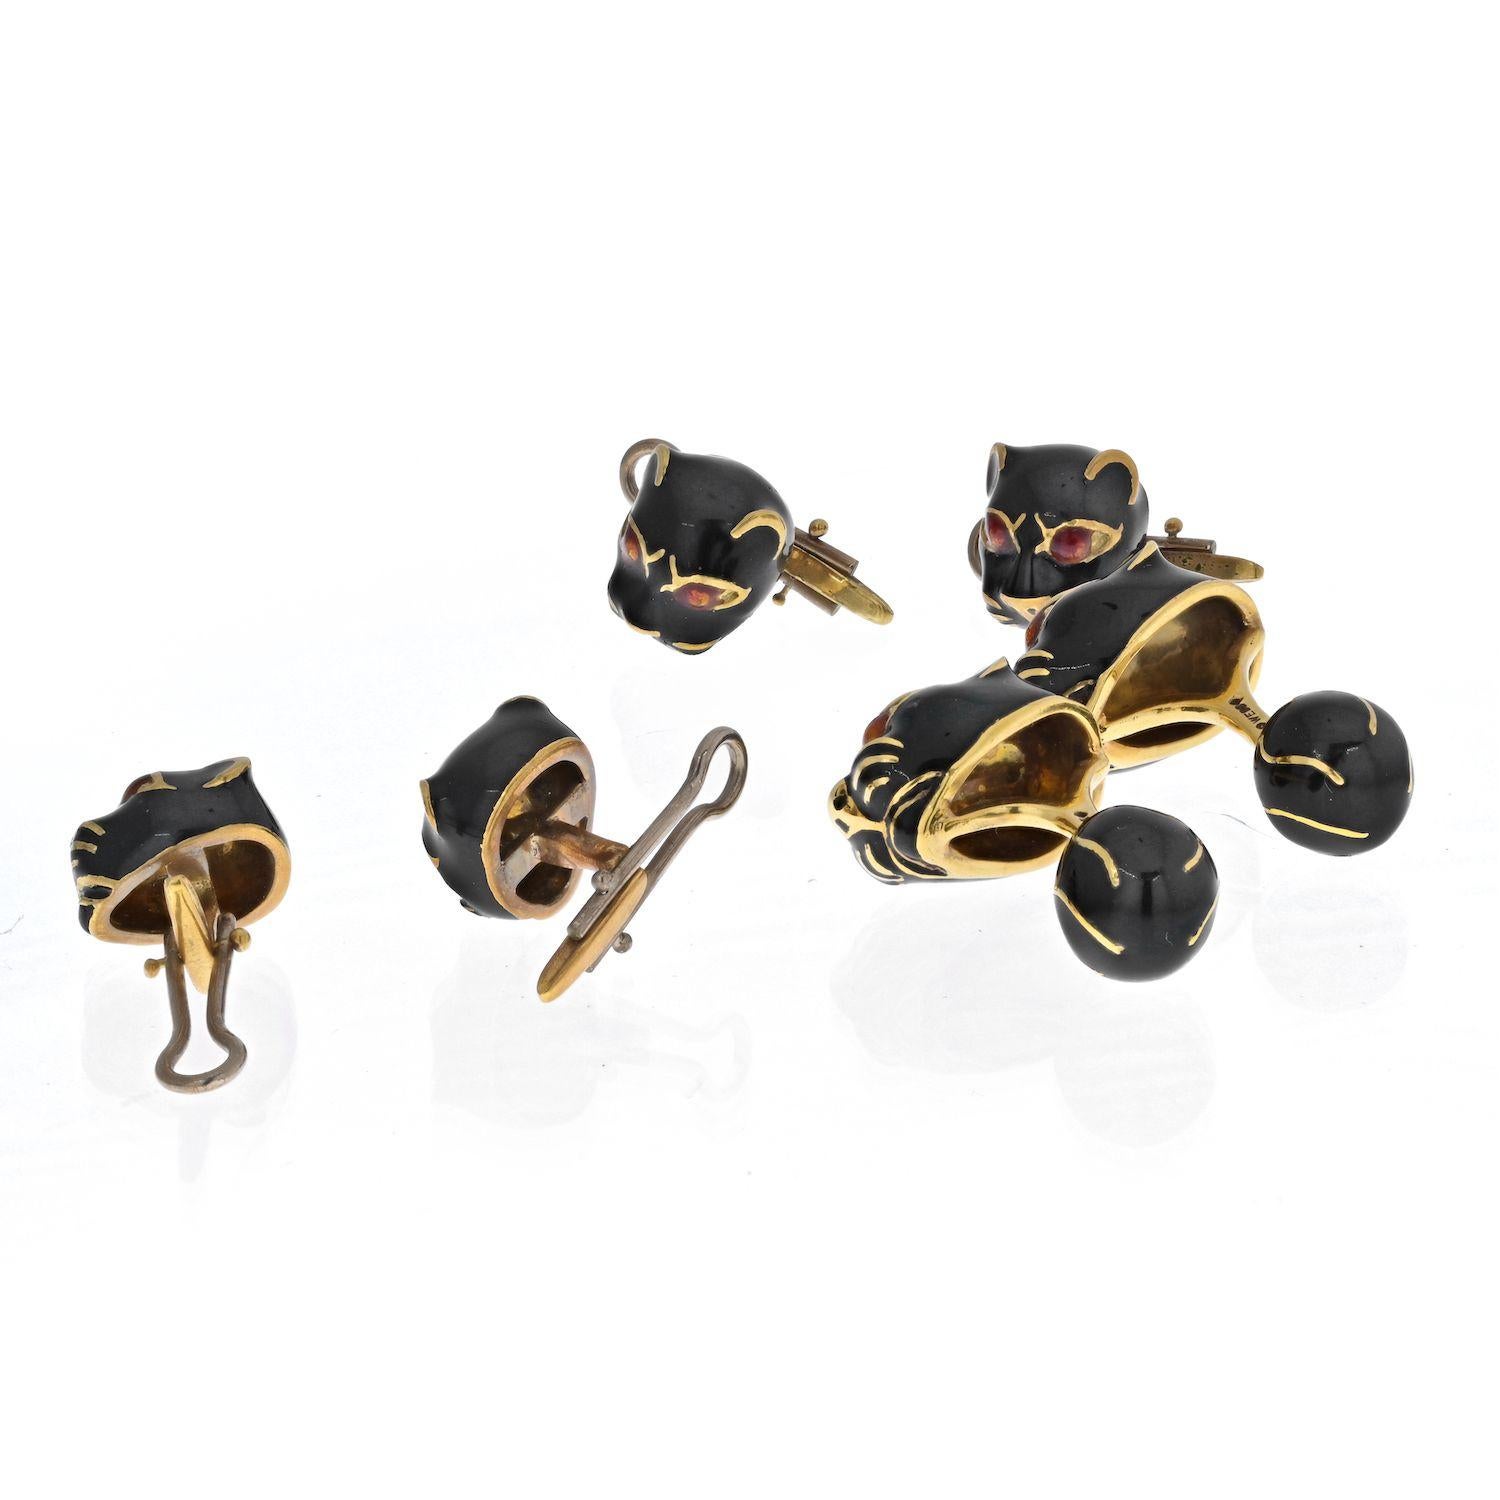 Panthers represent stealth, strength, and awareness. Their eyes are piercing as if they can look right through your soul. These cufflinks are crafted of black enamel over pure 18k yellow gold, and feature red ruby eyes. Rare find from America's most